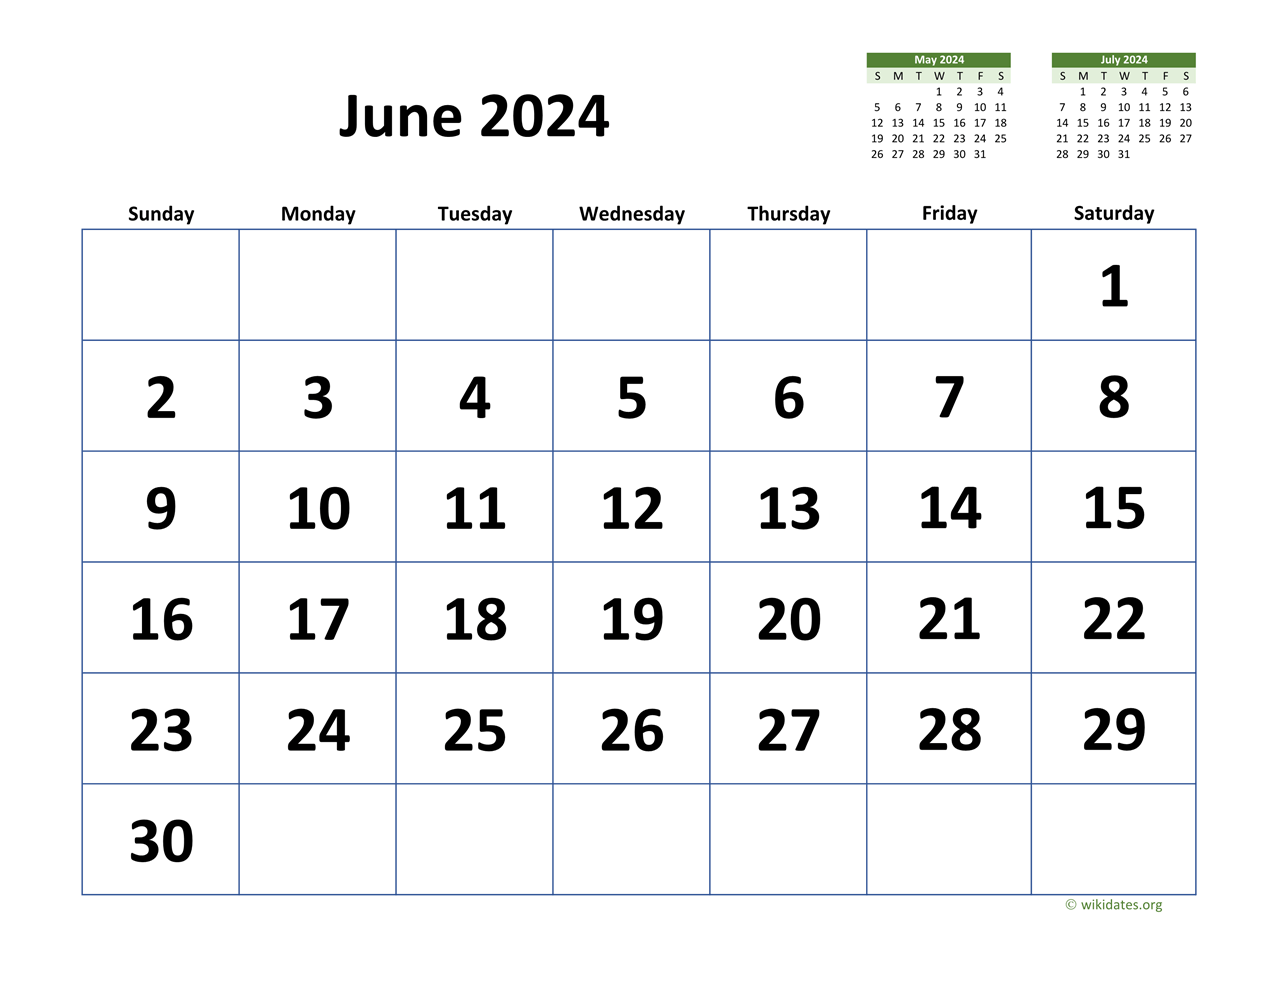 June 2024 Calendar with Extralarge Dates